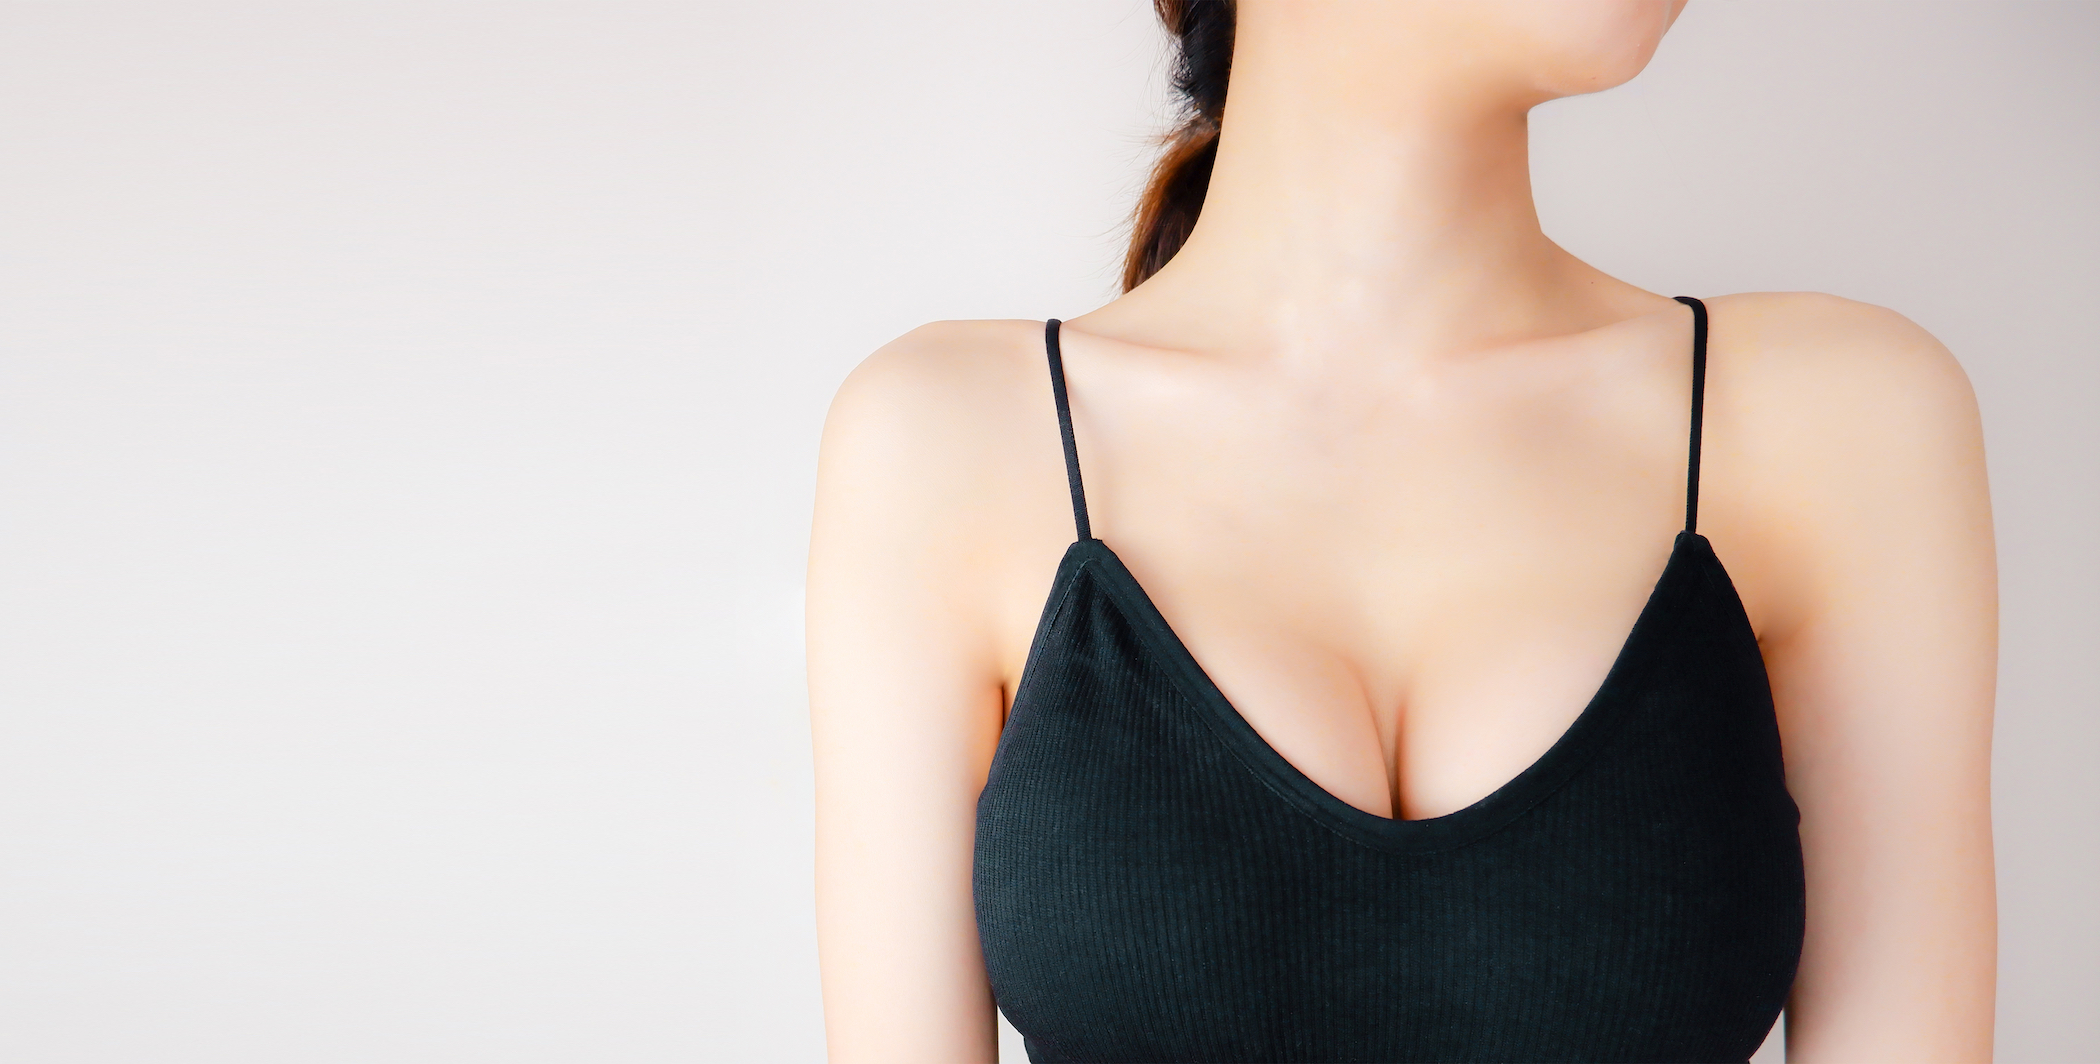 From DDD to B: Why I Chose Breast Reduction Surgery – HOME